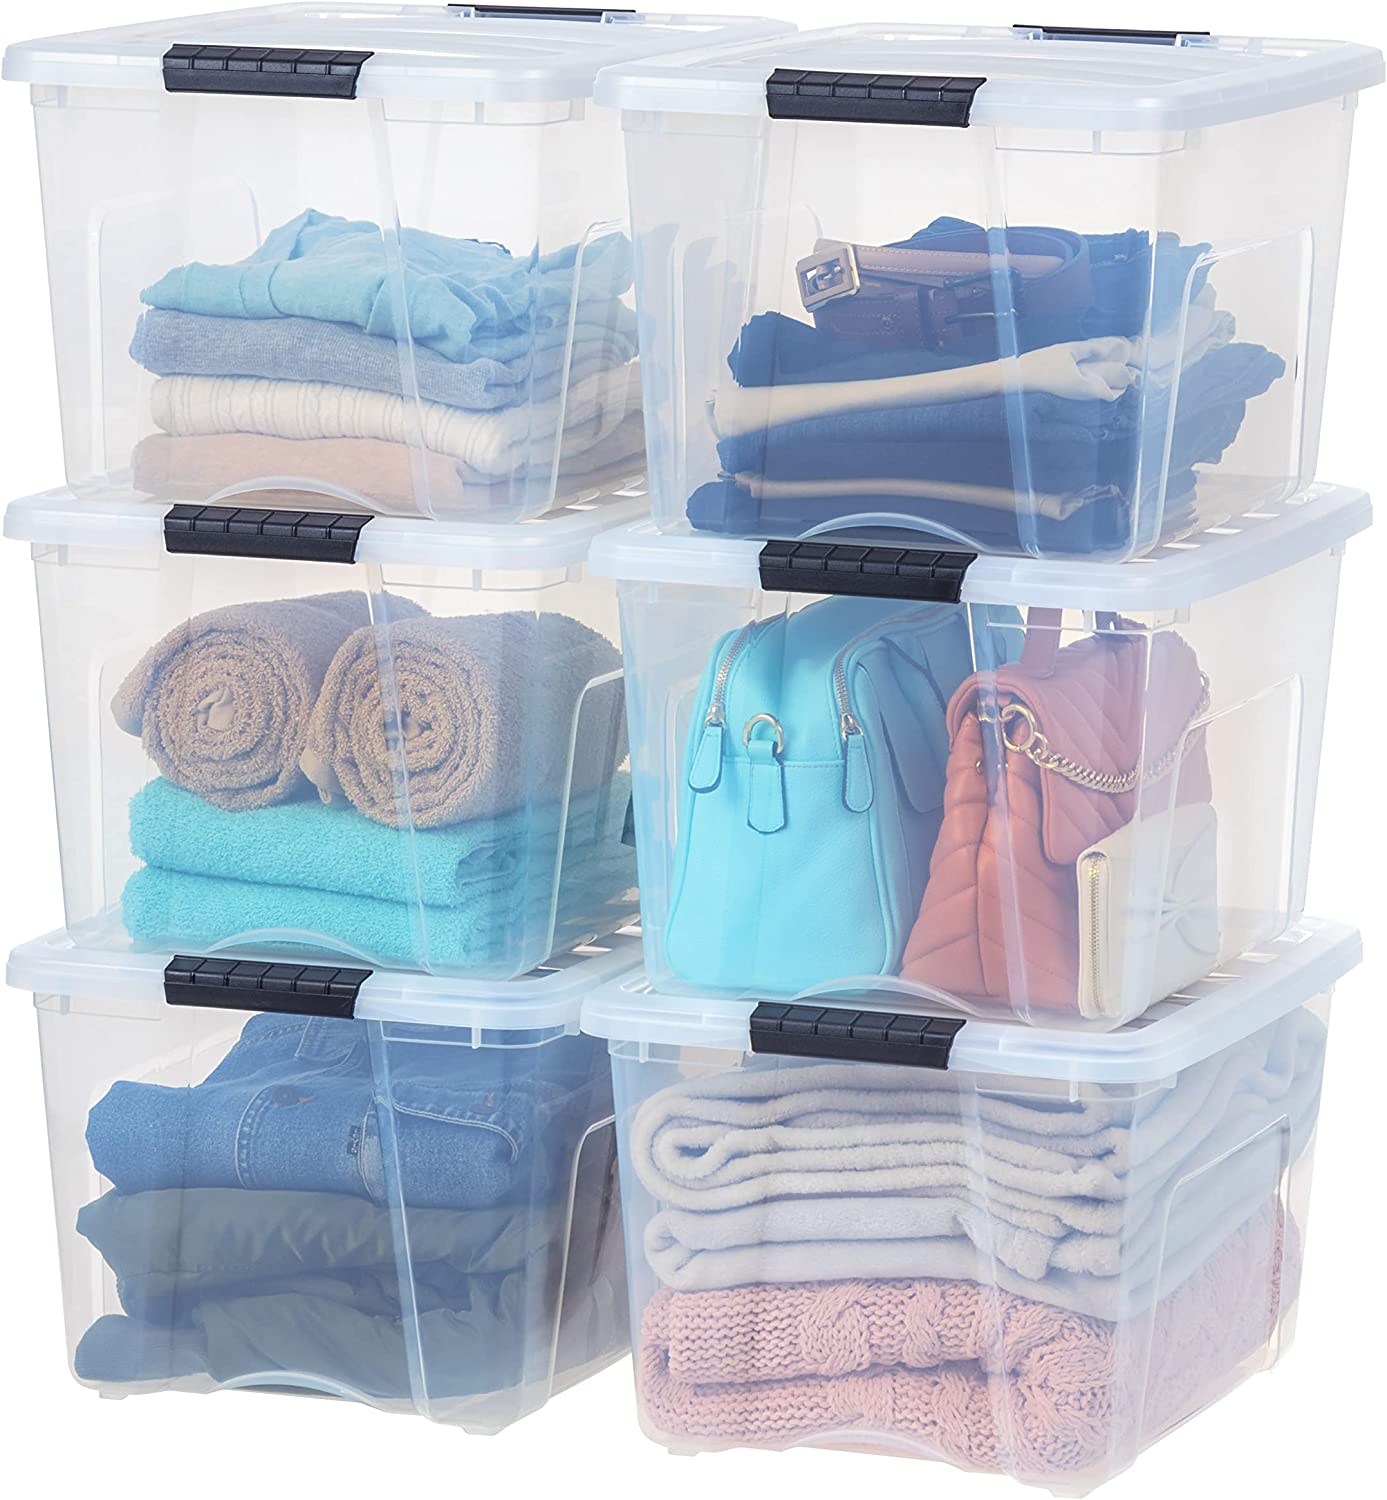 IRIS USA 53 Quart Stackable Plastic Storage Bins with Lids and